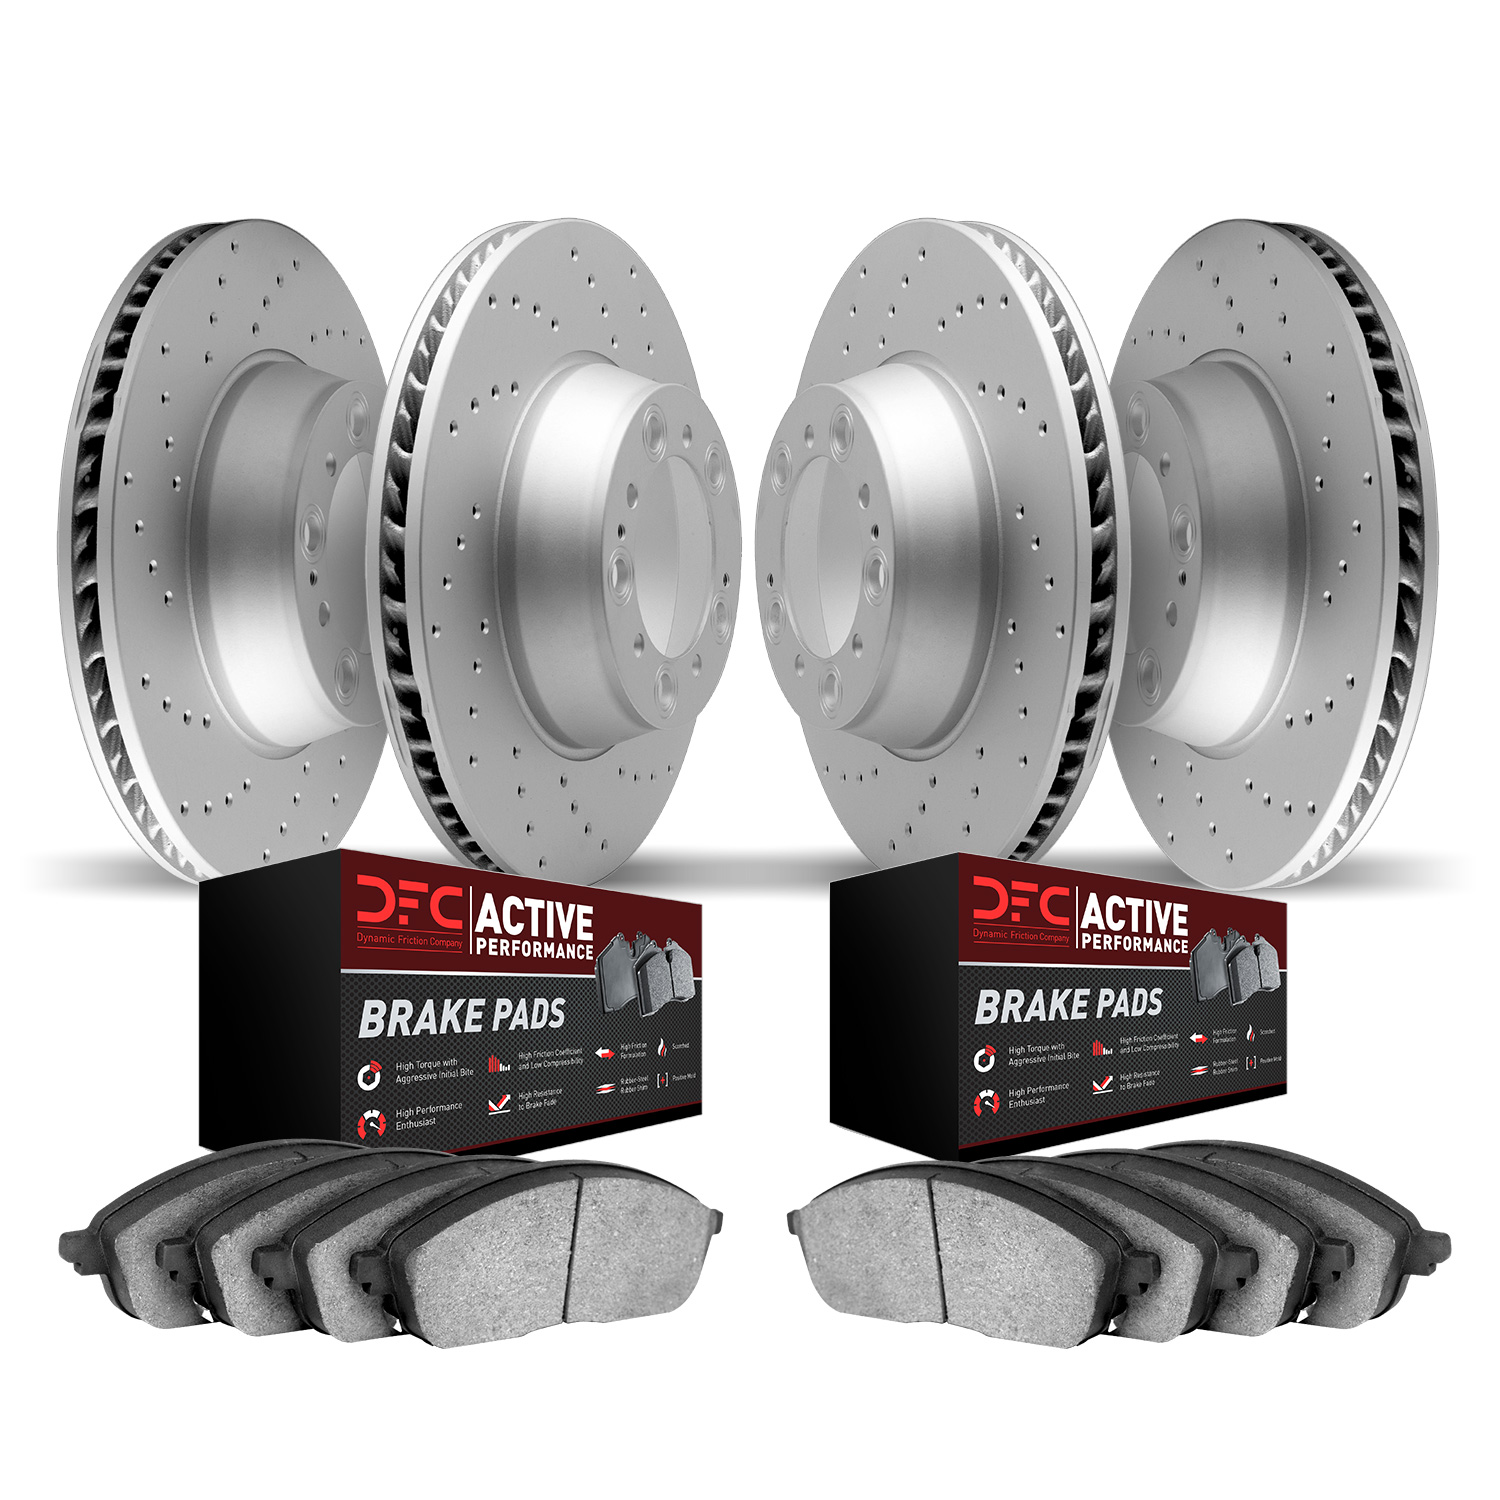 2704-73018 Geoperformance Drilled Brake Rotors with Active Performance Pads Kit, 2012-2015 Audi/Volkswagen, Position: Front and